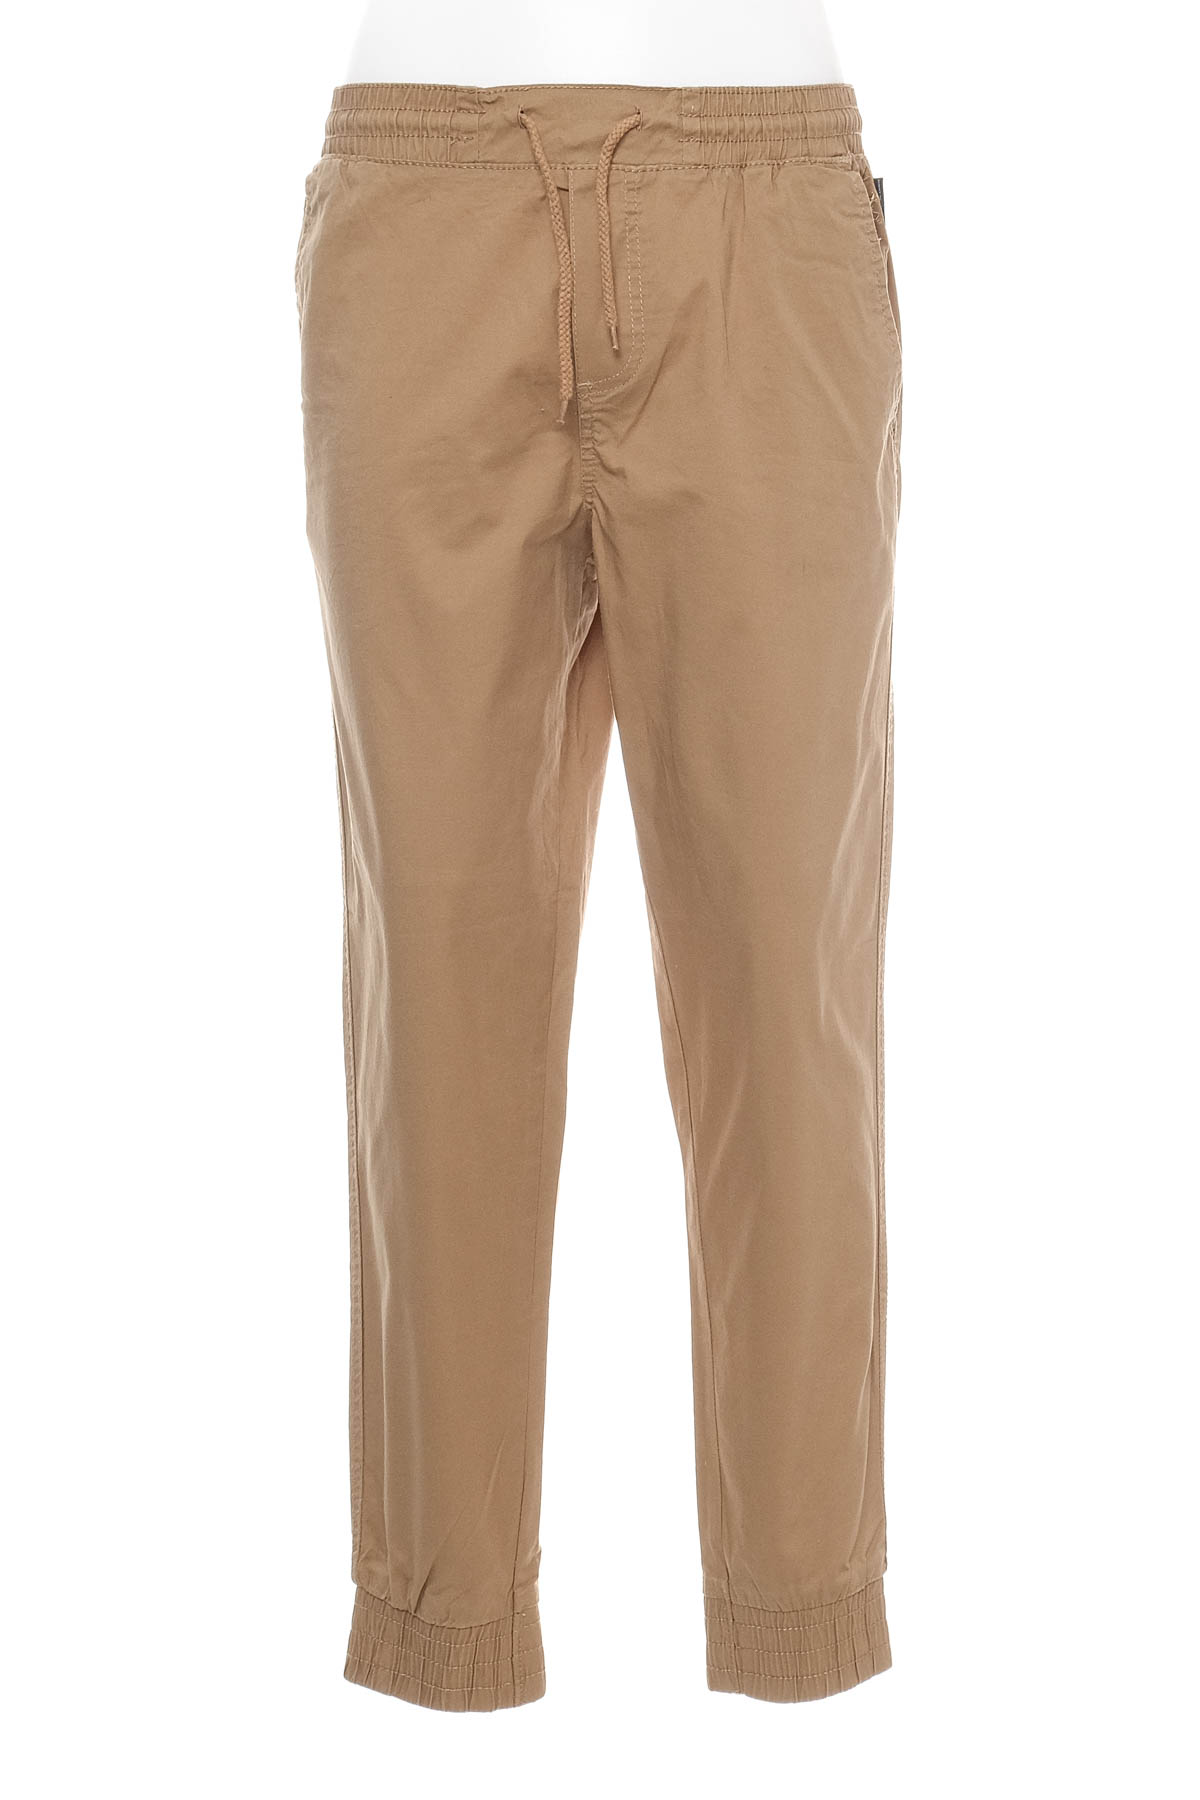 Men's trousers - Beverly Hills Polo Club - 0